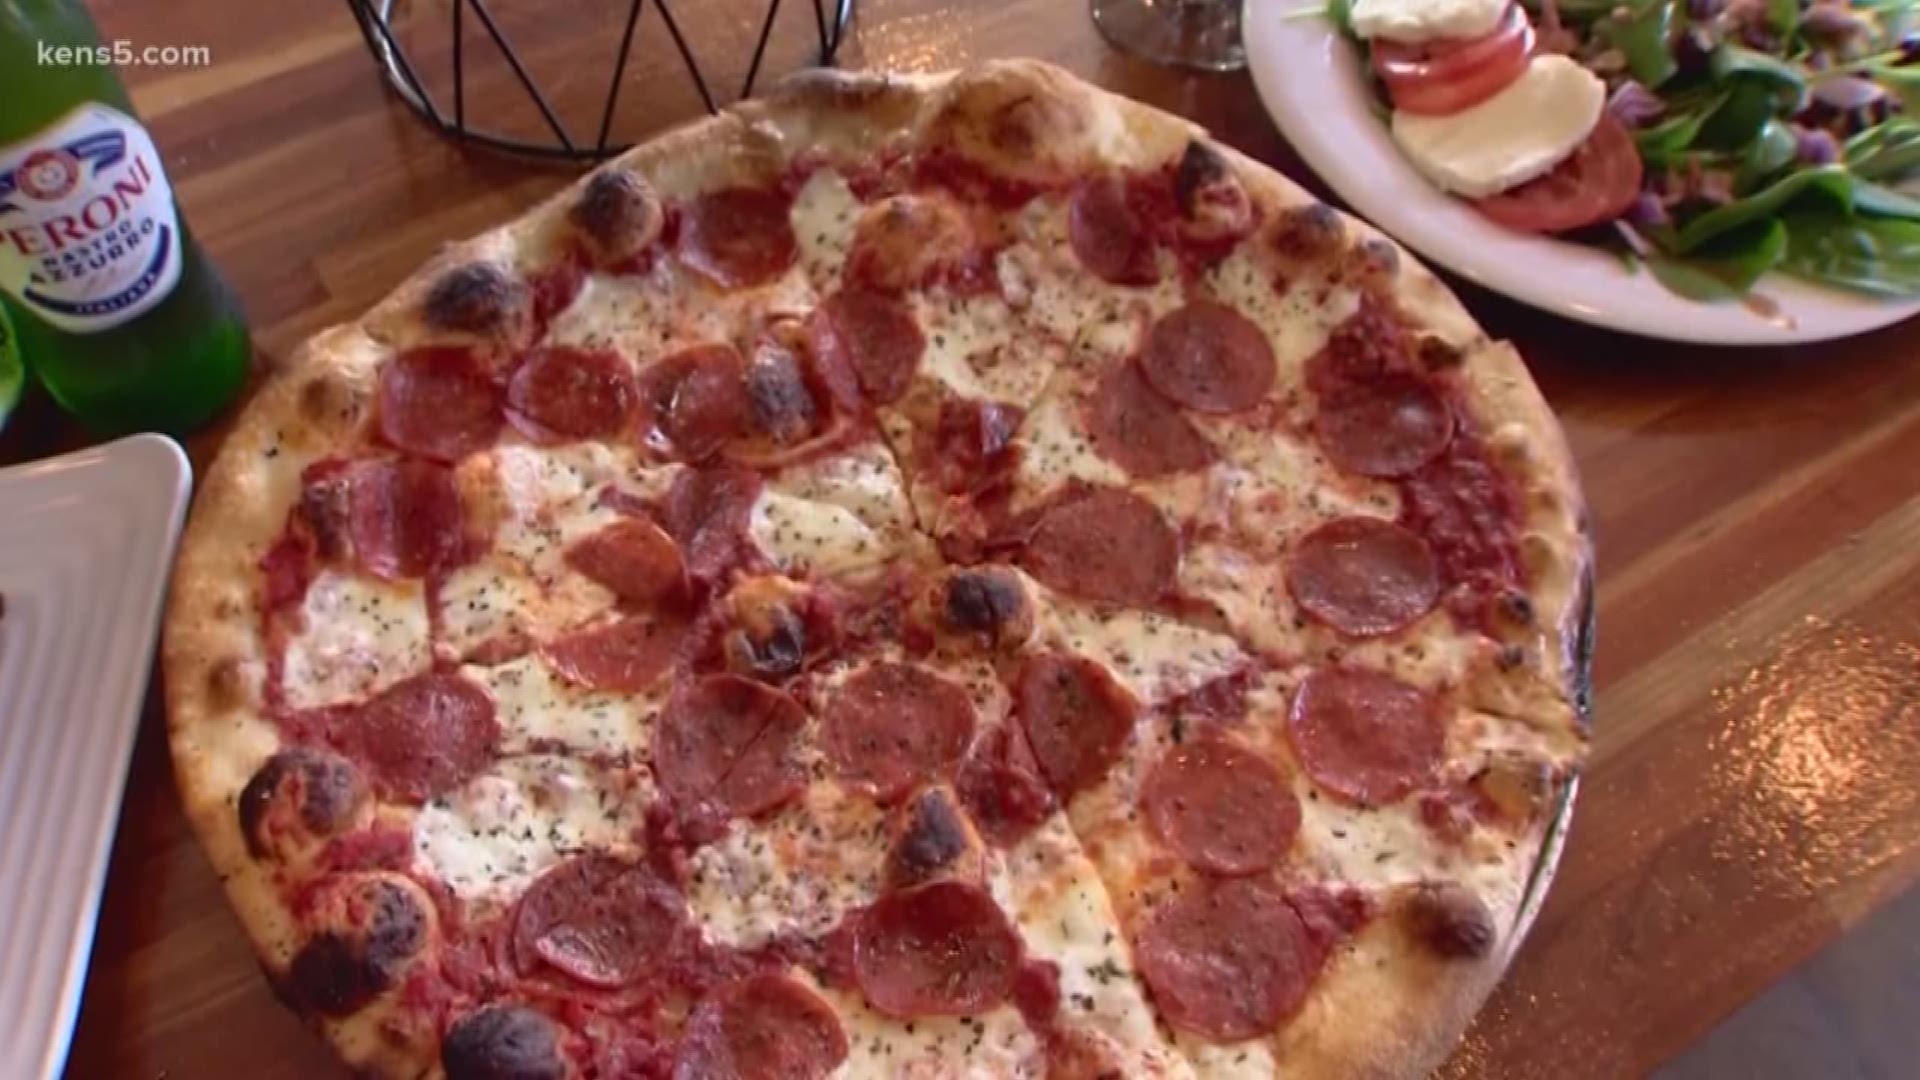 Neighborhood Eats is wrapping up its Perfect Pizza Tour at a San Antonio restaurant serving up New York, Chicago, and California-style pizzas. And Marvin Hurst ate up every detail they put on his plate.